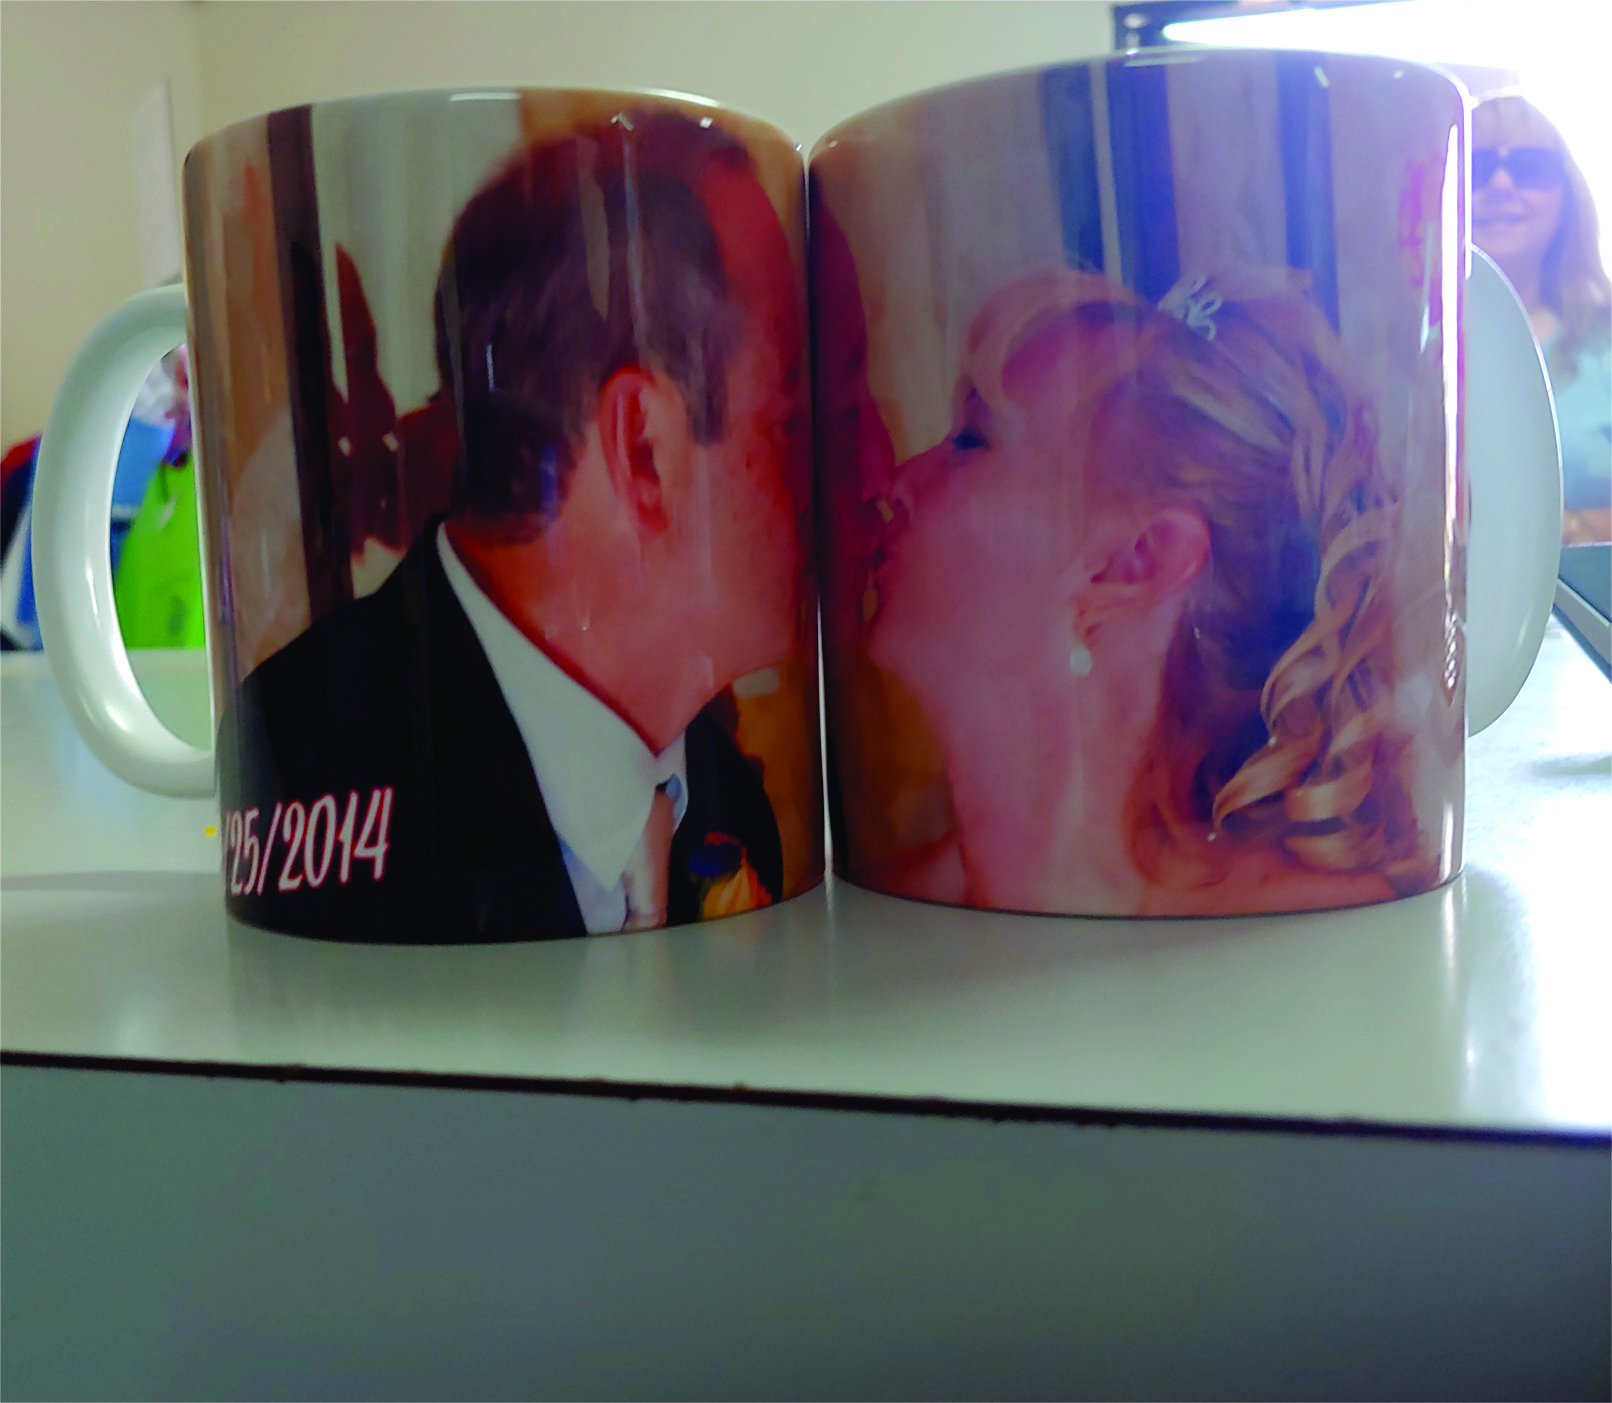 Printed 2 mugs as if they are Kissing Each Other.